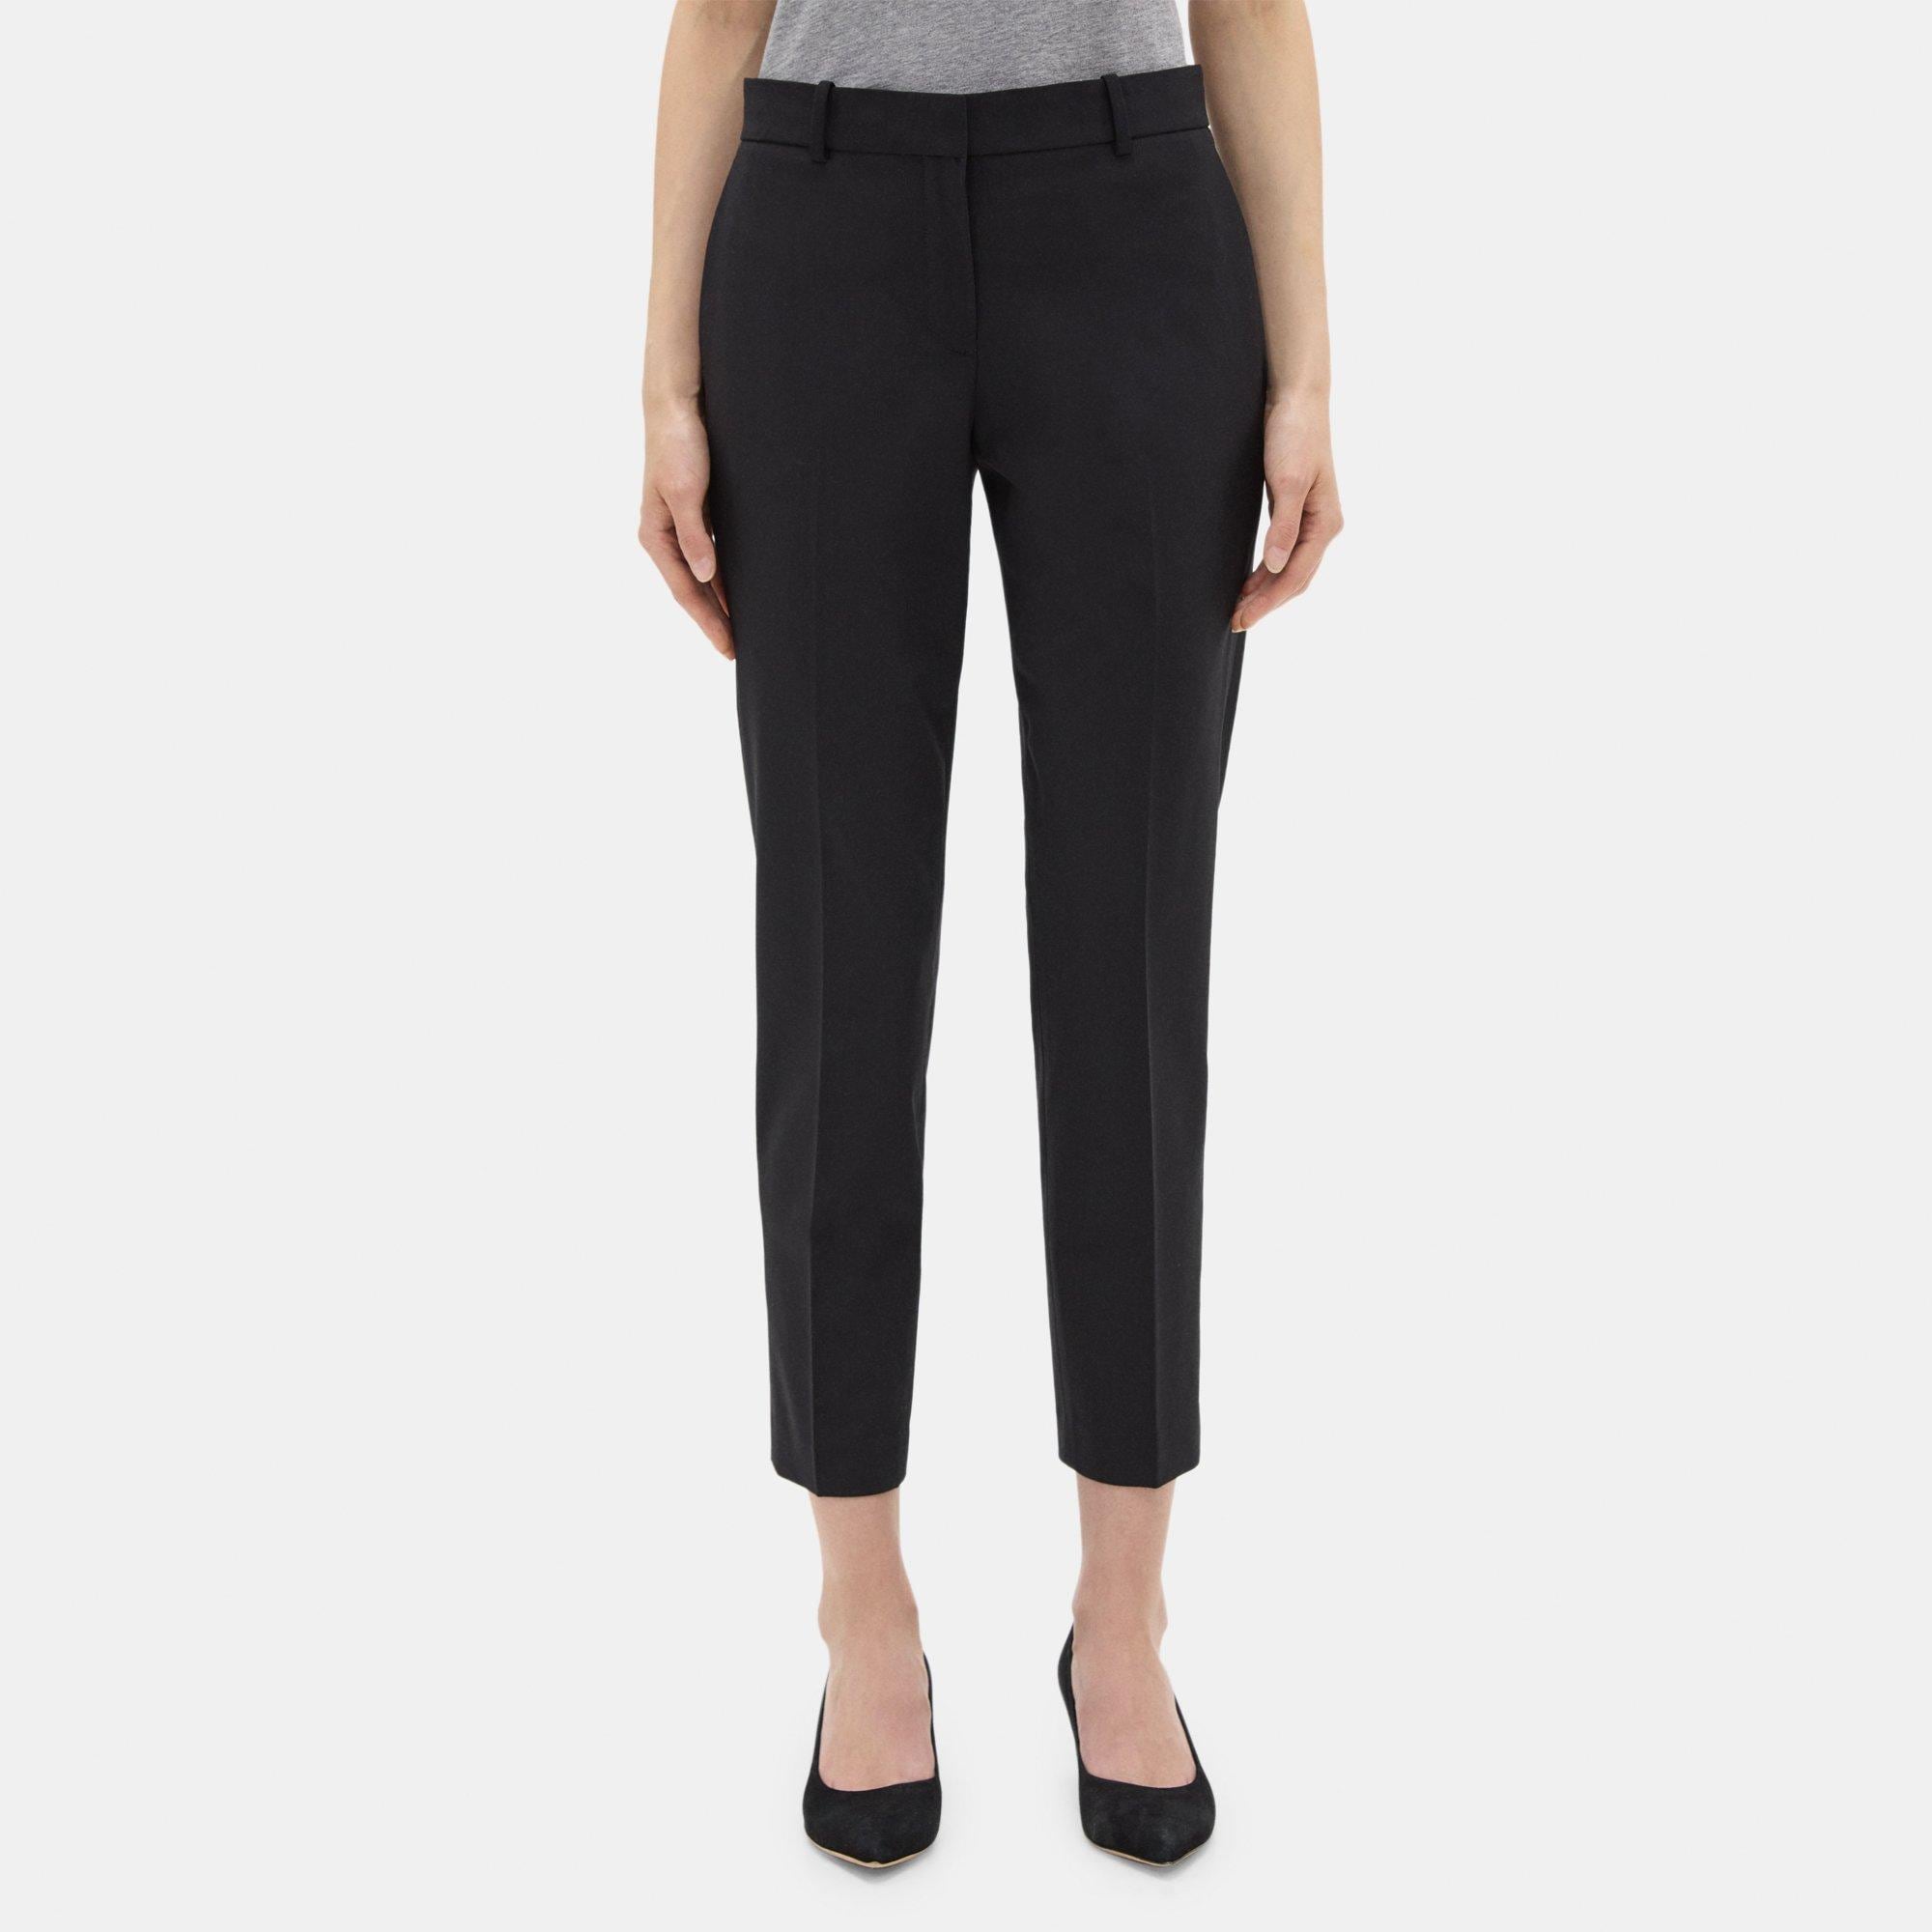 Theory Classic Crop Pant in Sevona Stretch Wool